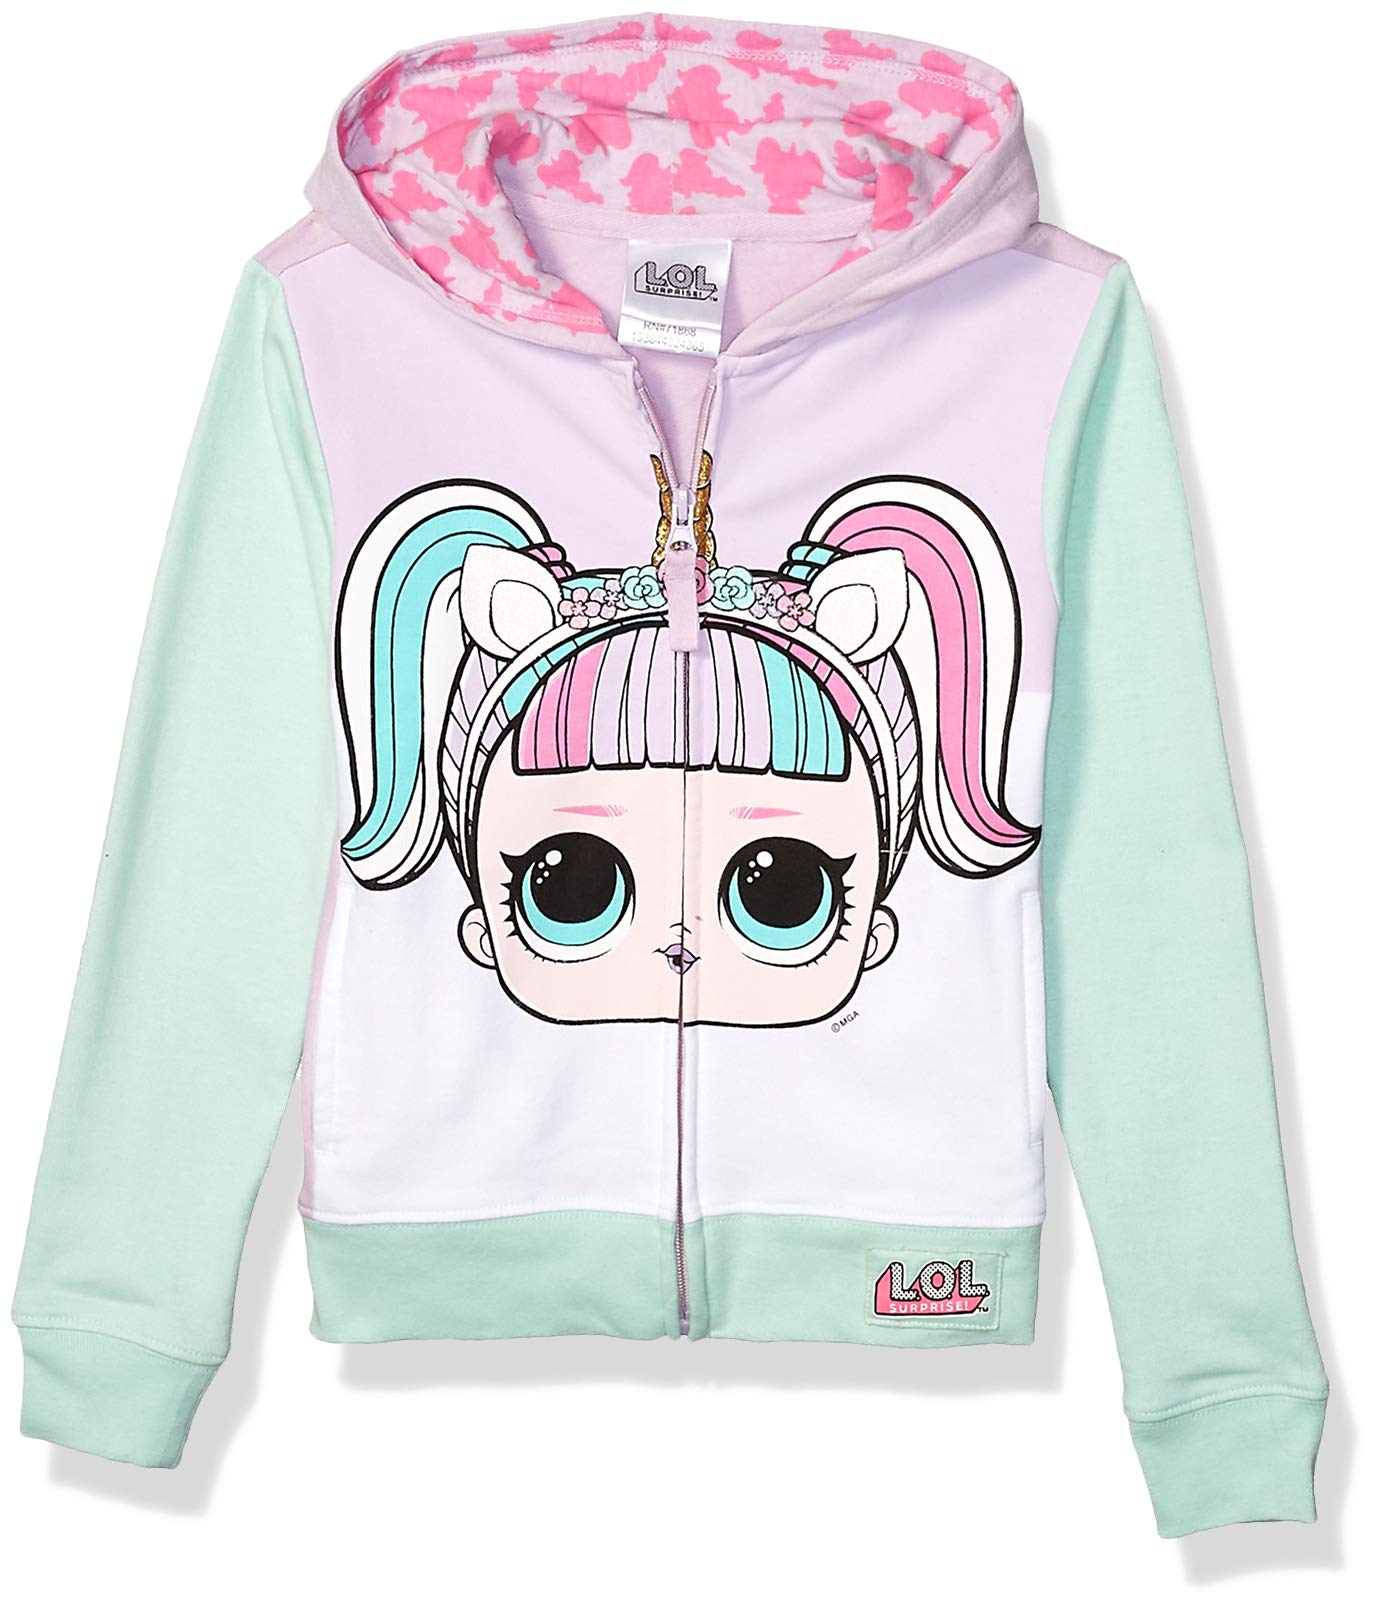 L.O.L. Surprise! Girls' The Theater Club Unicorn Big Face Zip-up Hoodie